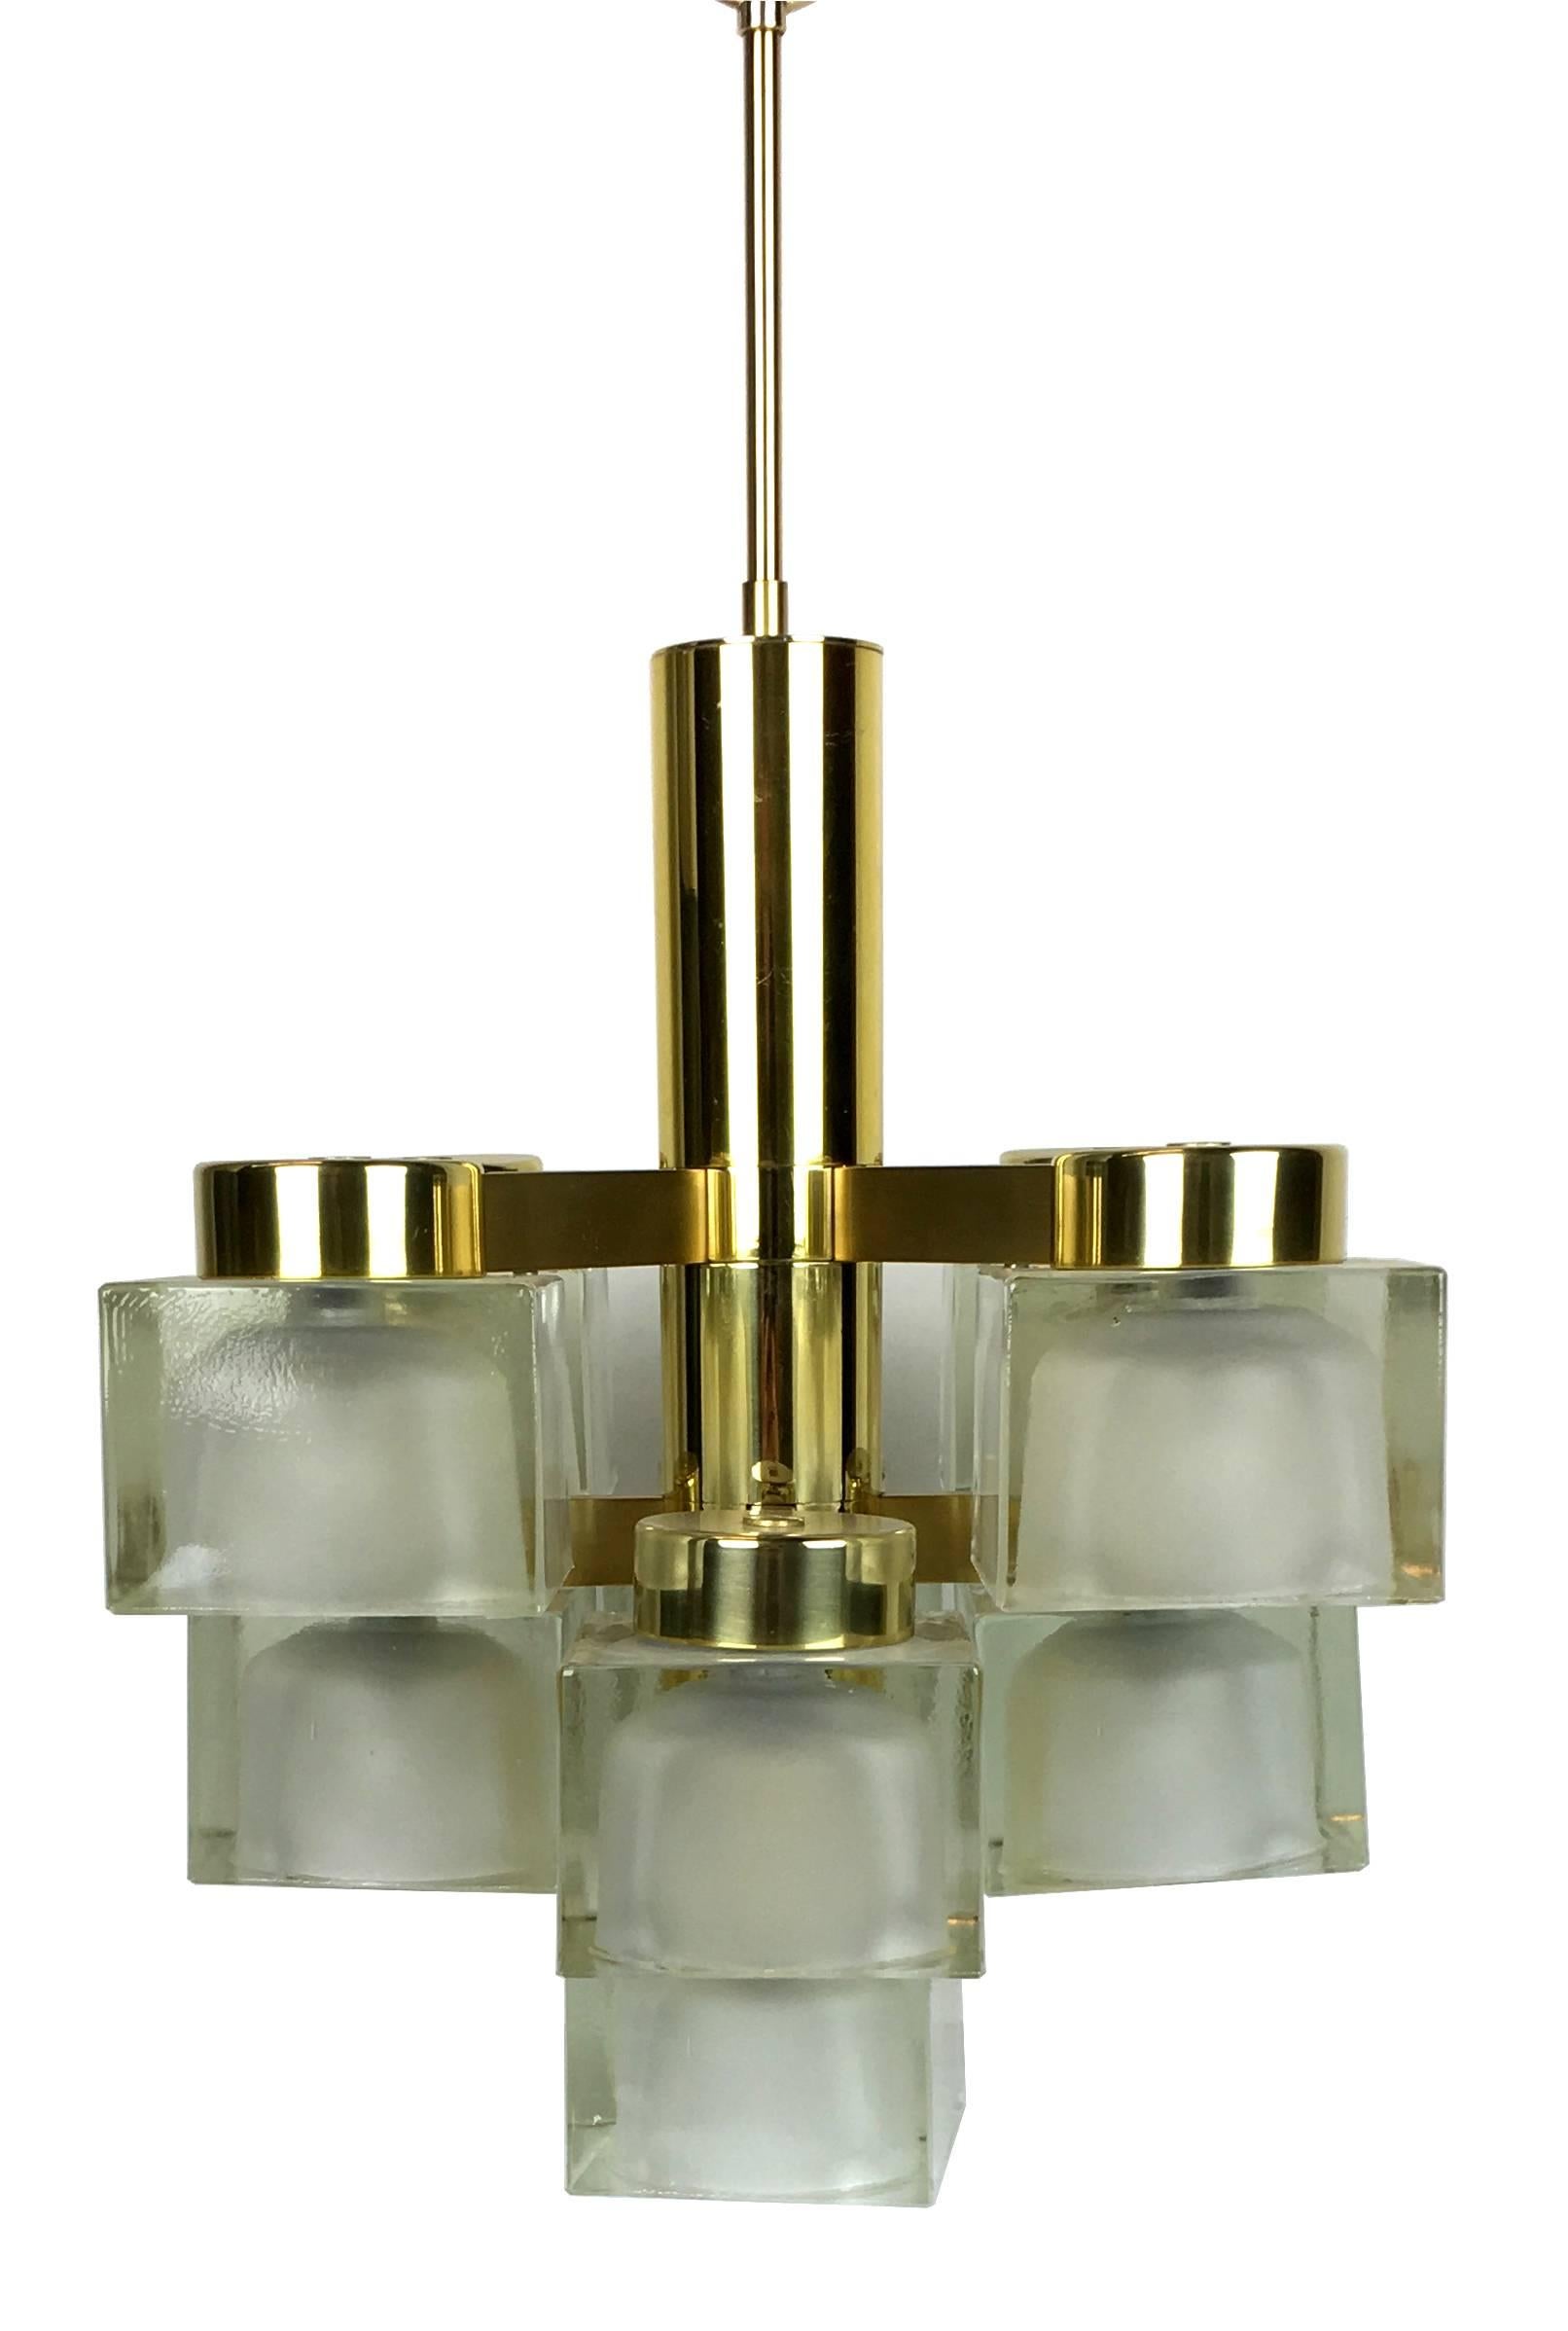 Fantastic brass chandelier with nine cast glass cube shades by Sciolari, Italy. The vintage piece is in excellent condition with virtually no wear or signs of age at all and all of the glass shades are perfect without chips or scratches. This is a